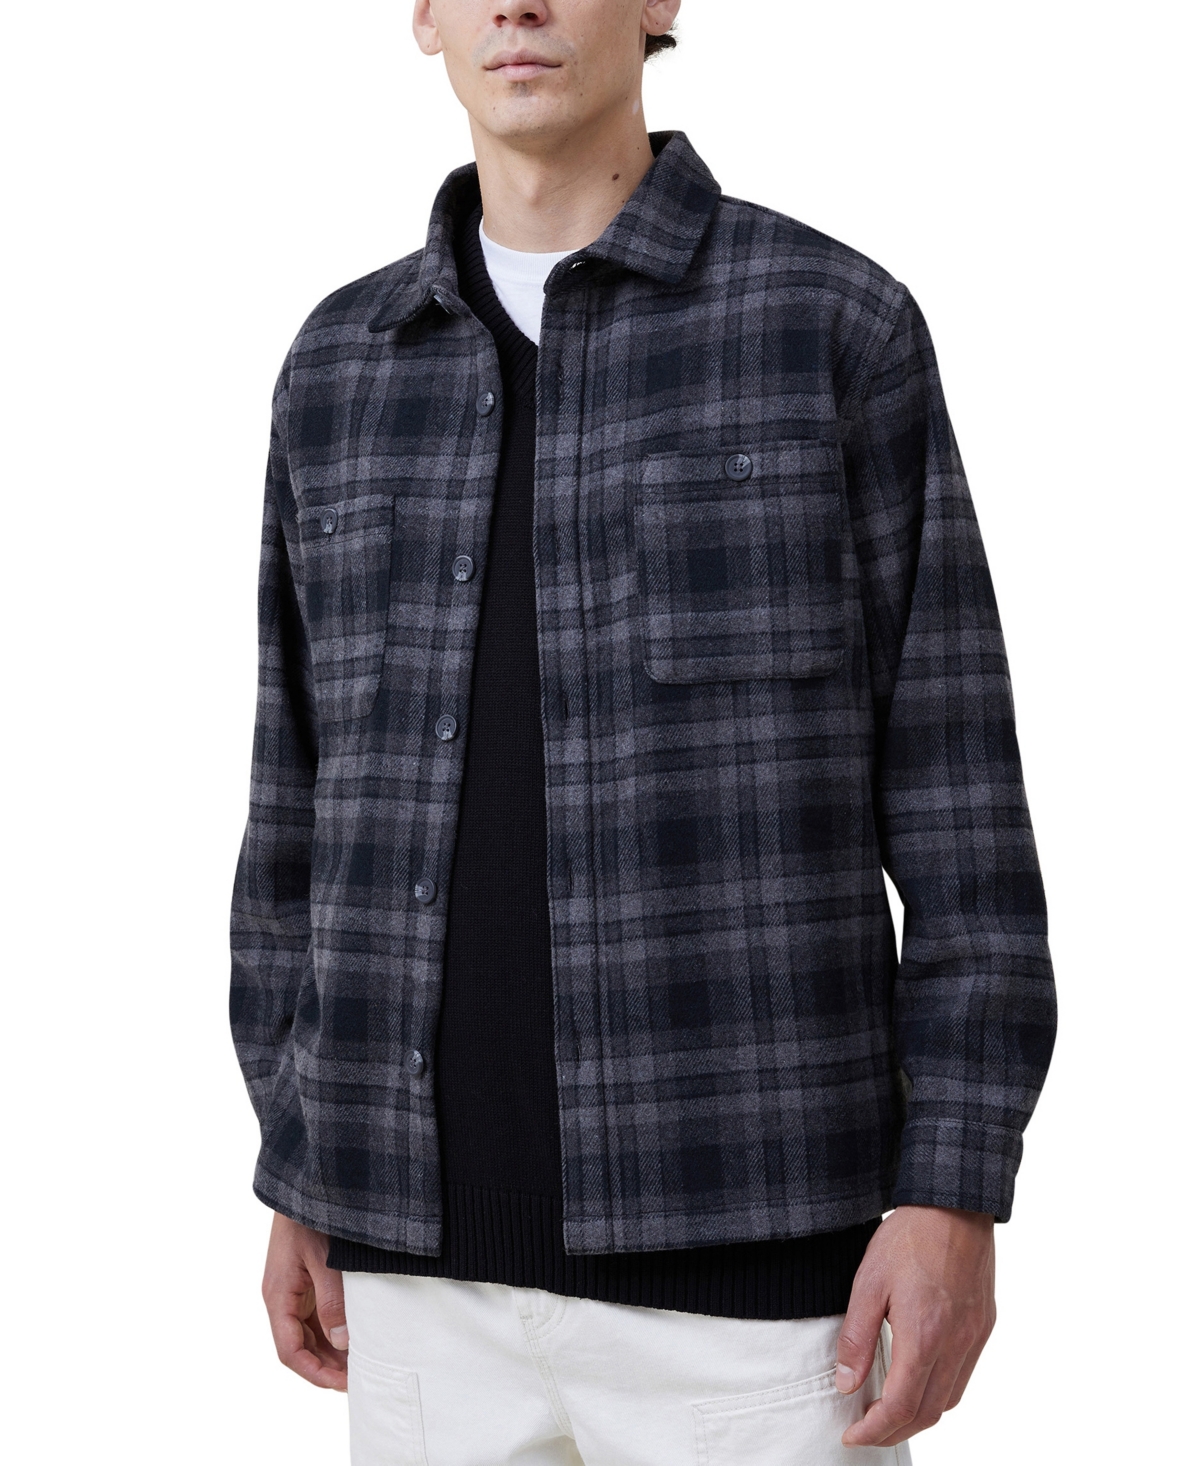 Cotton On Men's Heavy Over Shirt Jacket In Black Oversized Check